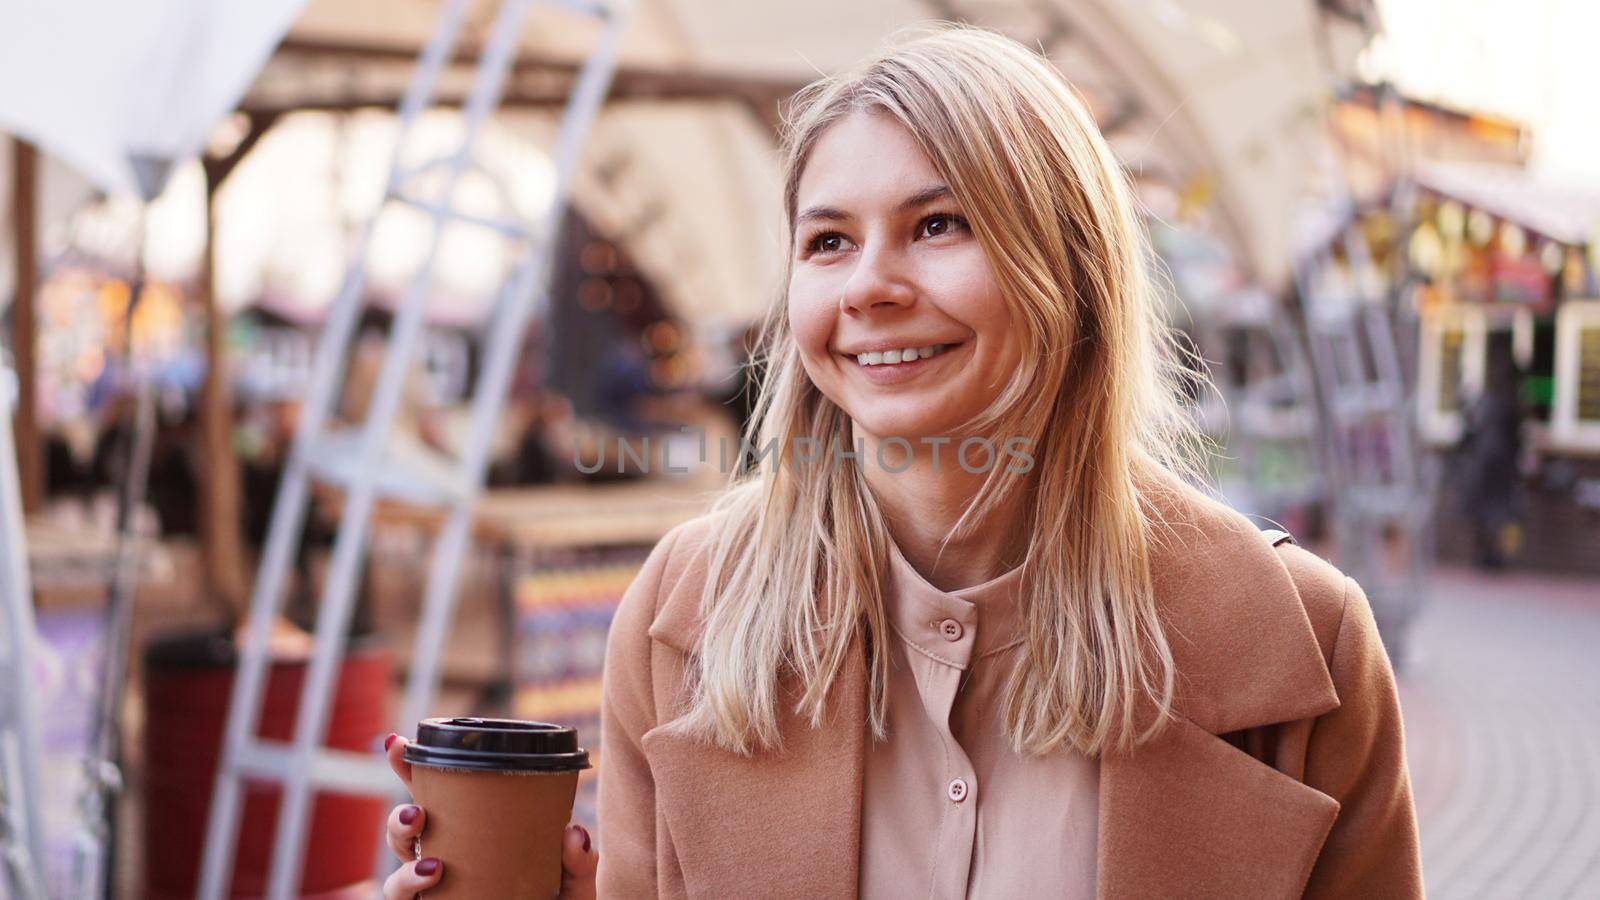 Young blonde with a cup of coffee. Woman at the food court. Lifestyle photo. Beautiful woman drinking coffee